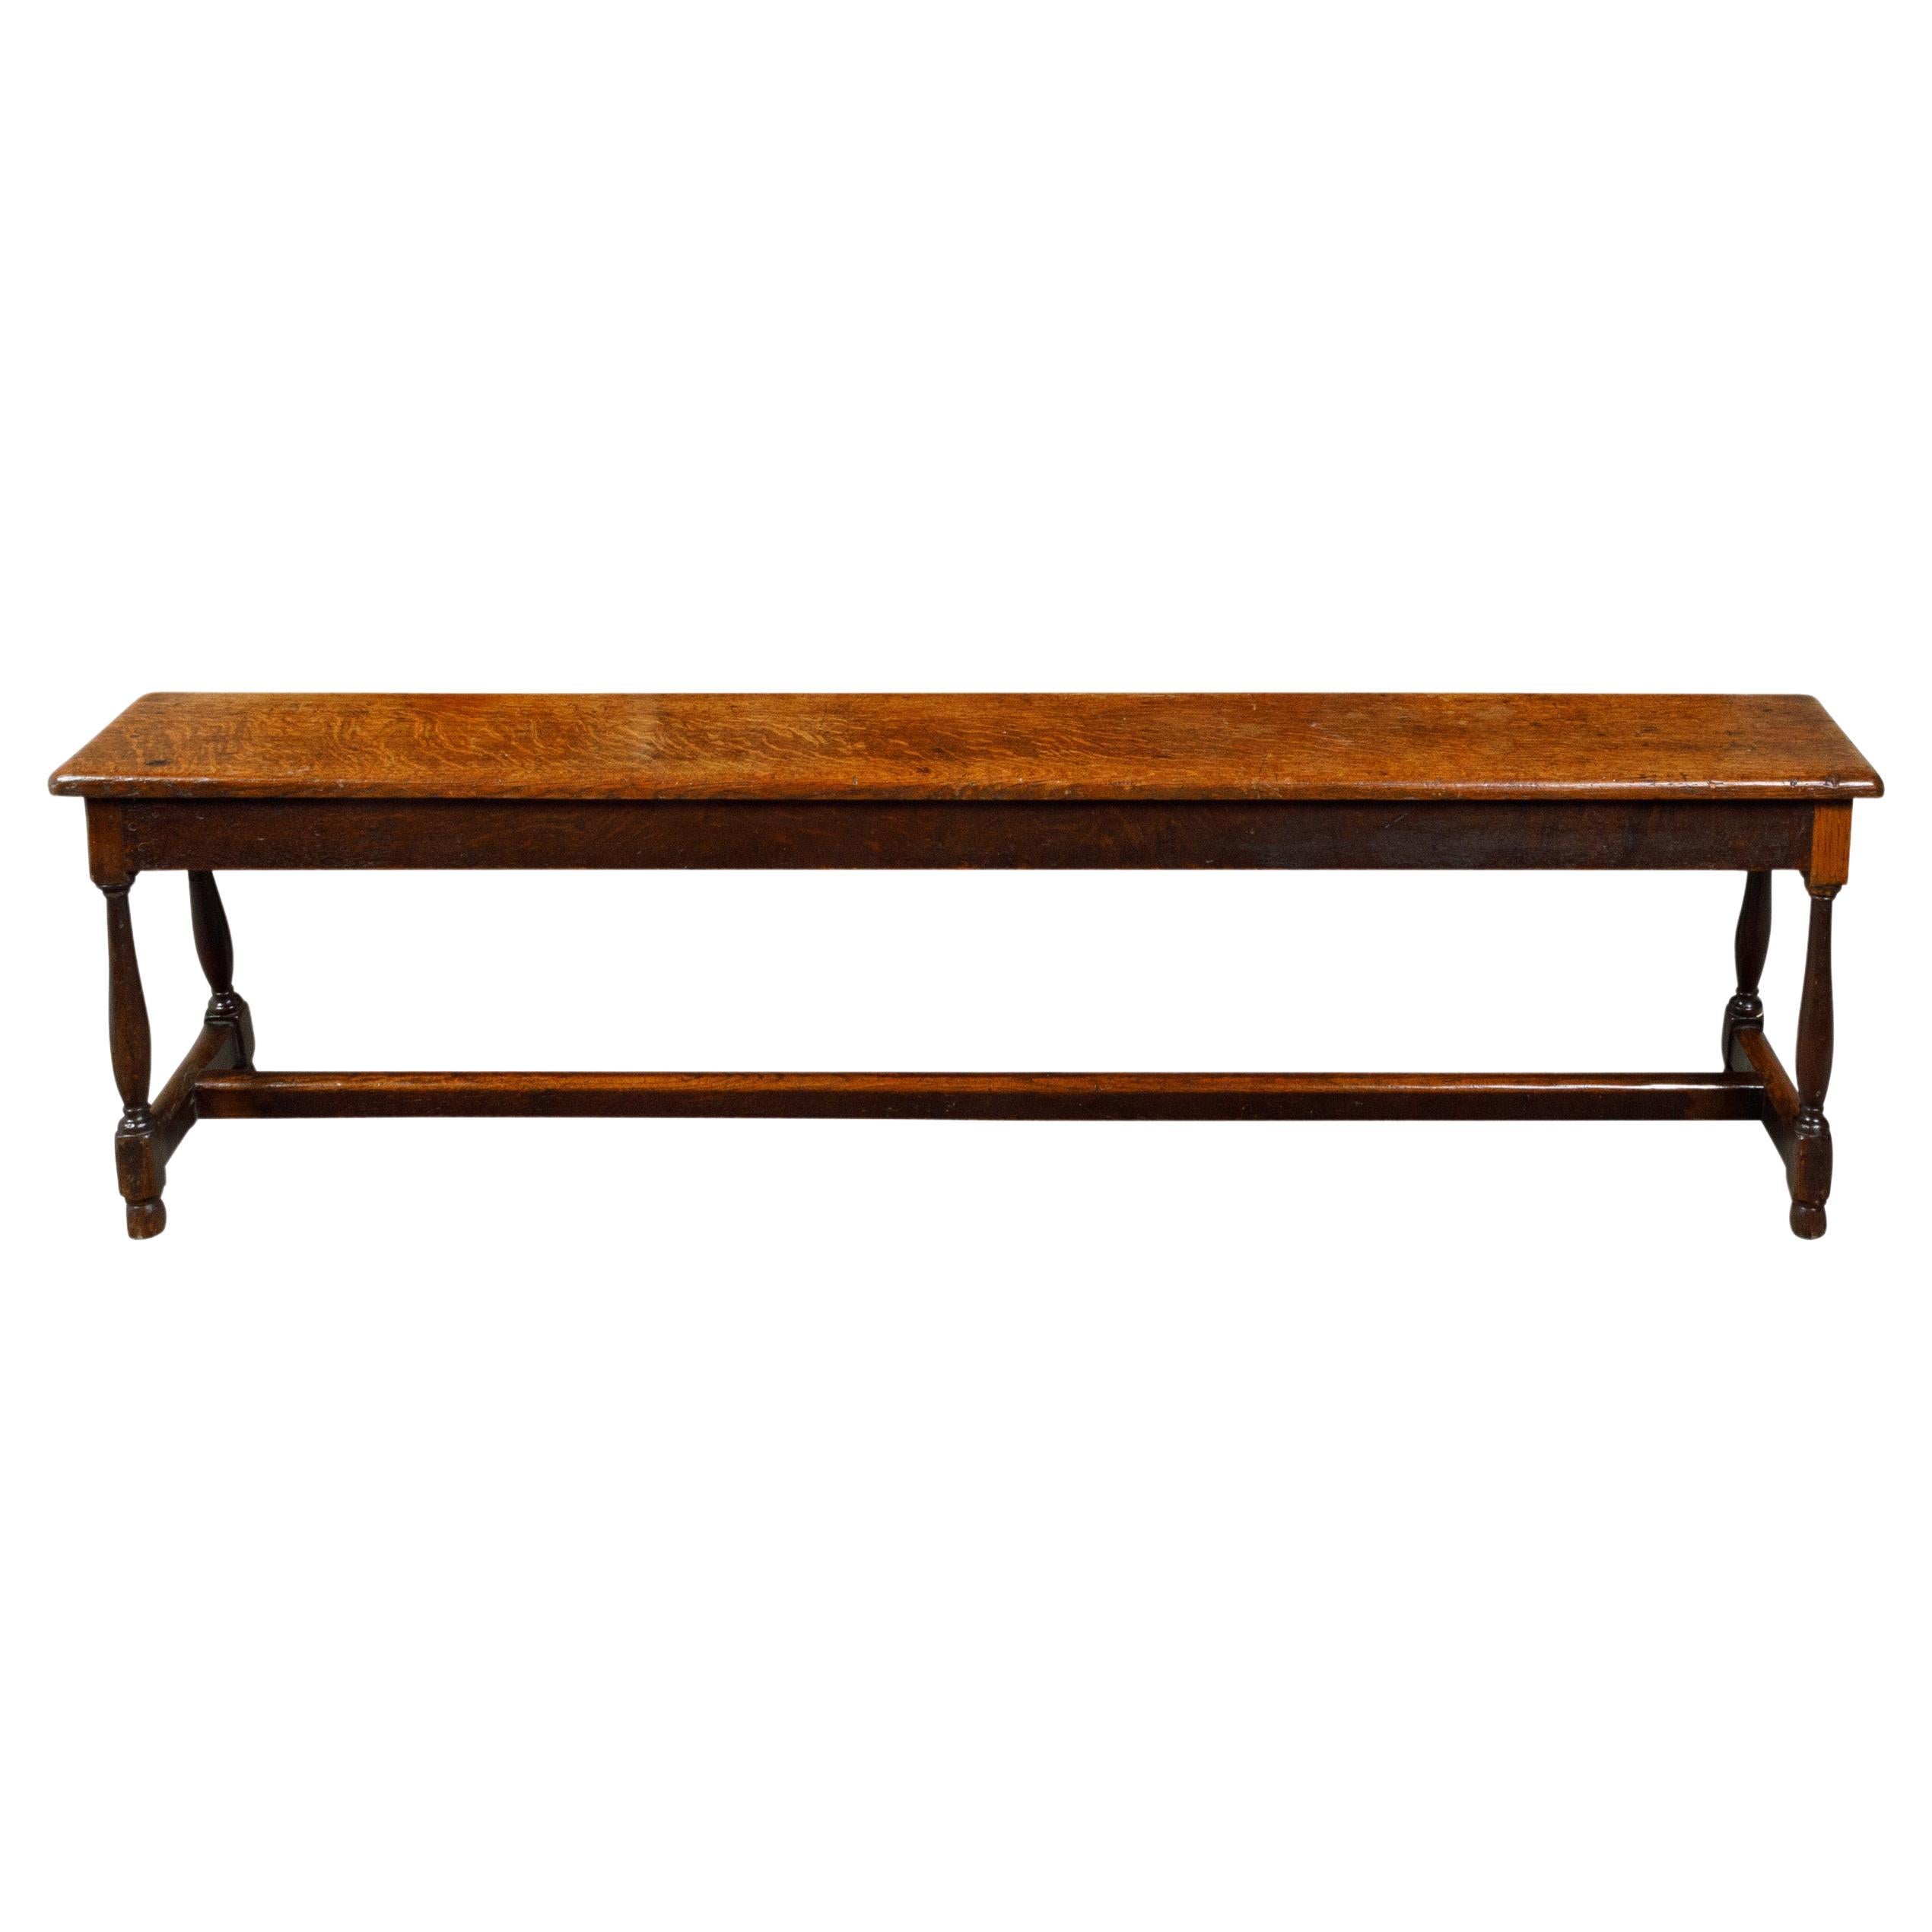 English 1900s Turn of the Century Oak Bench with Splaying Column-Shaped Legs